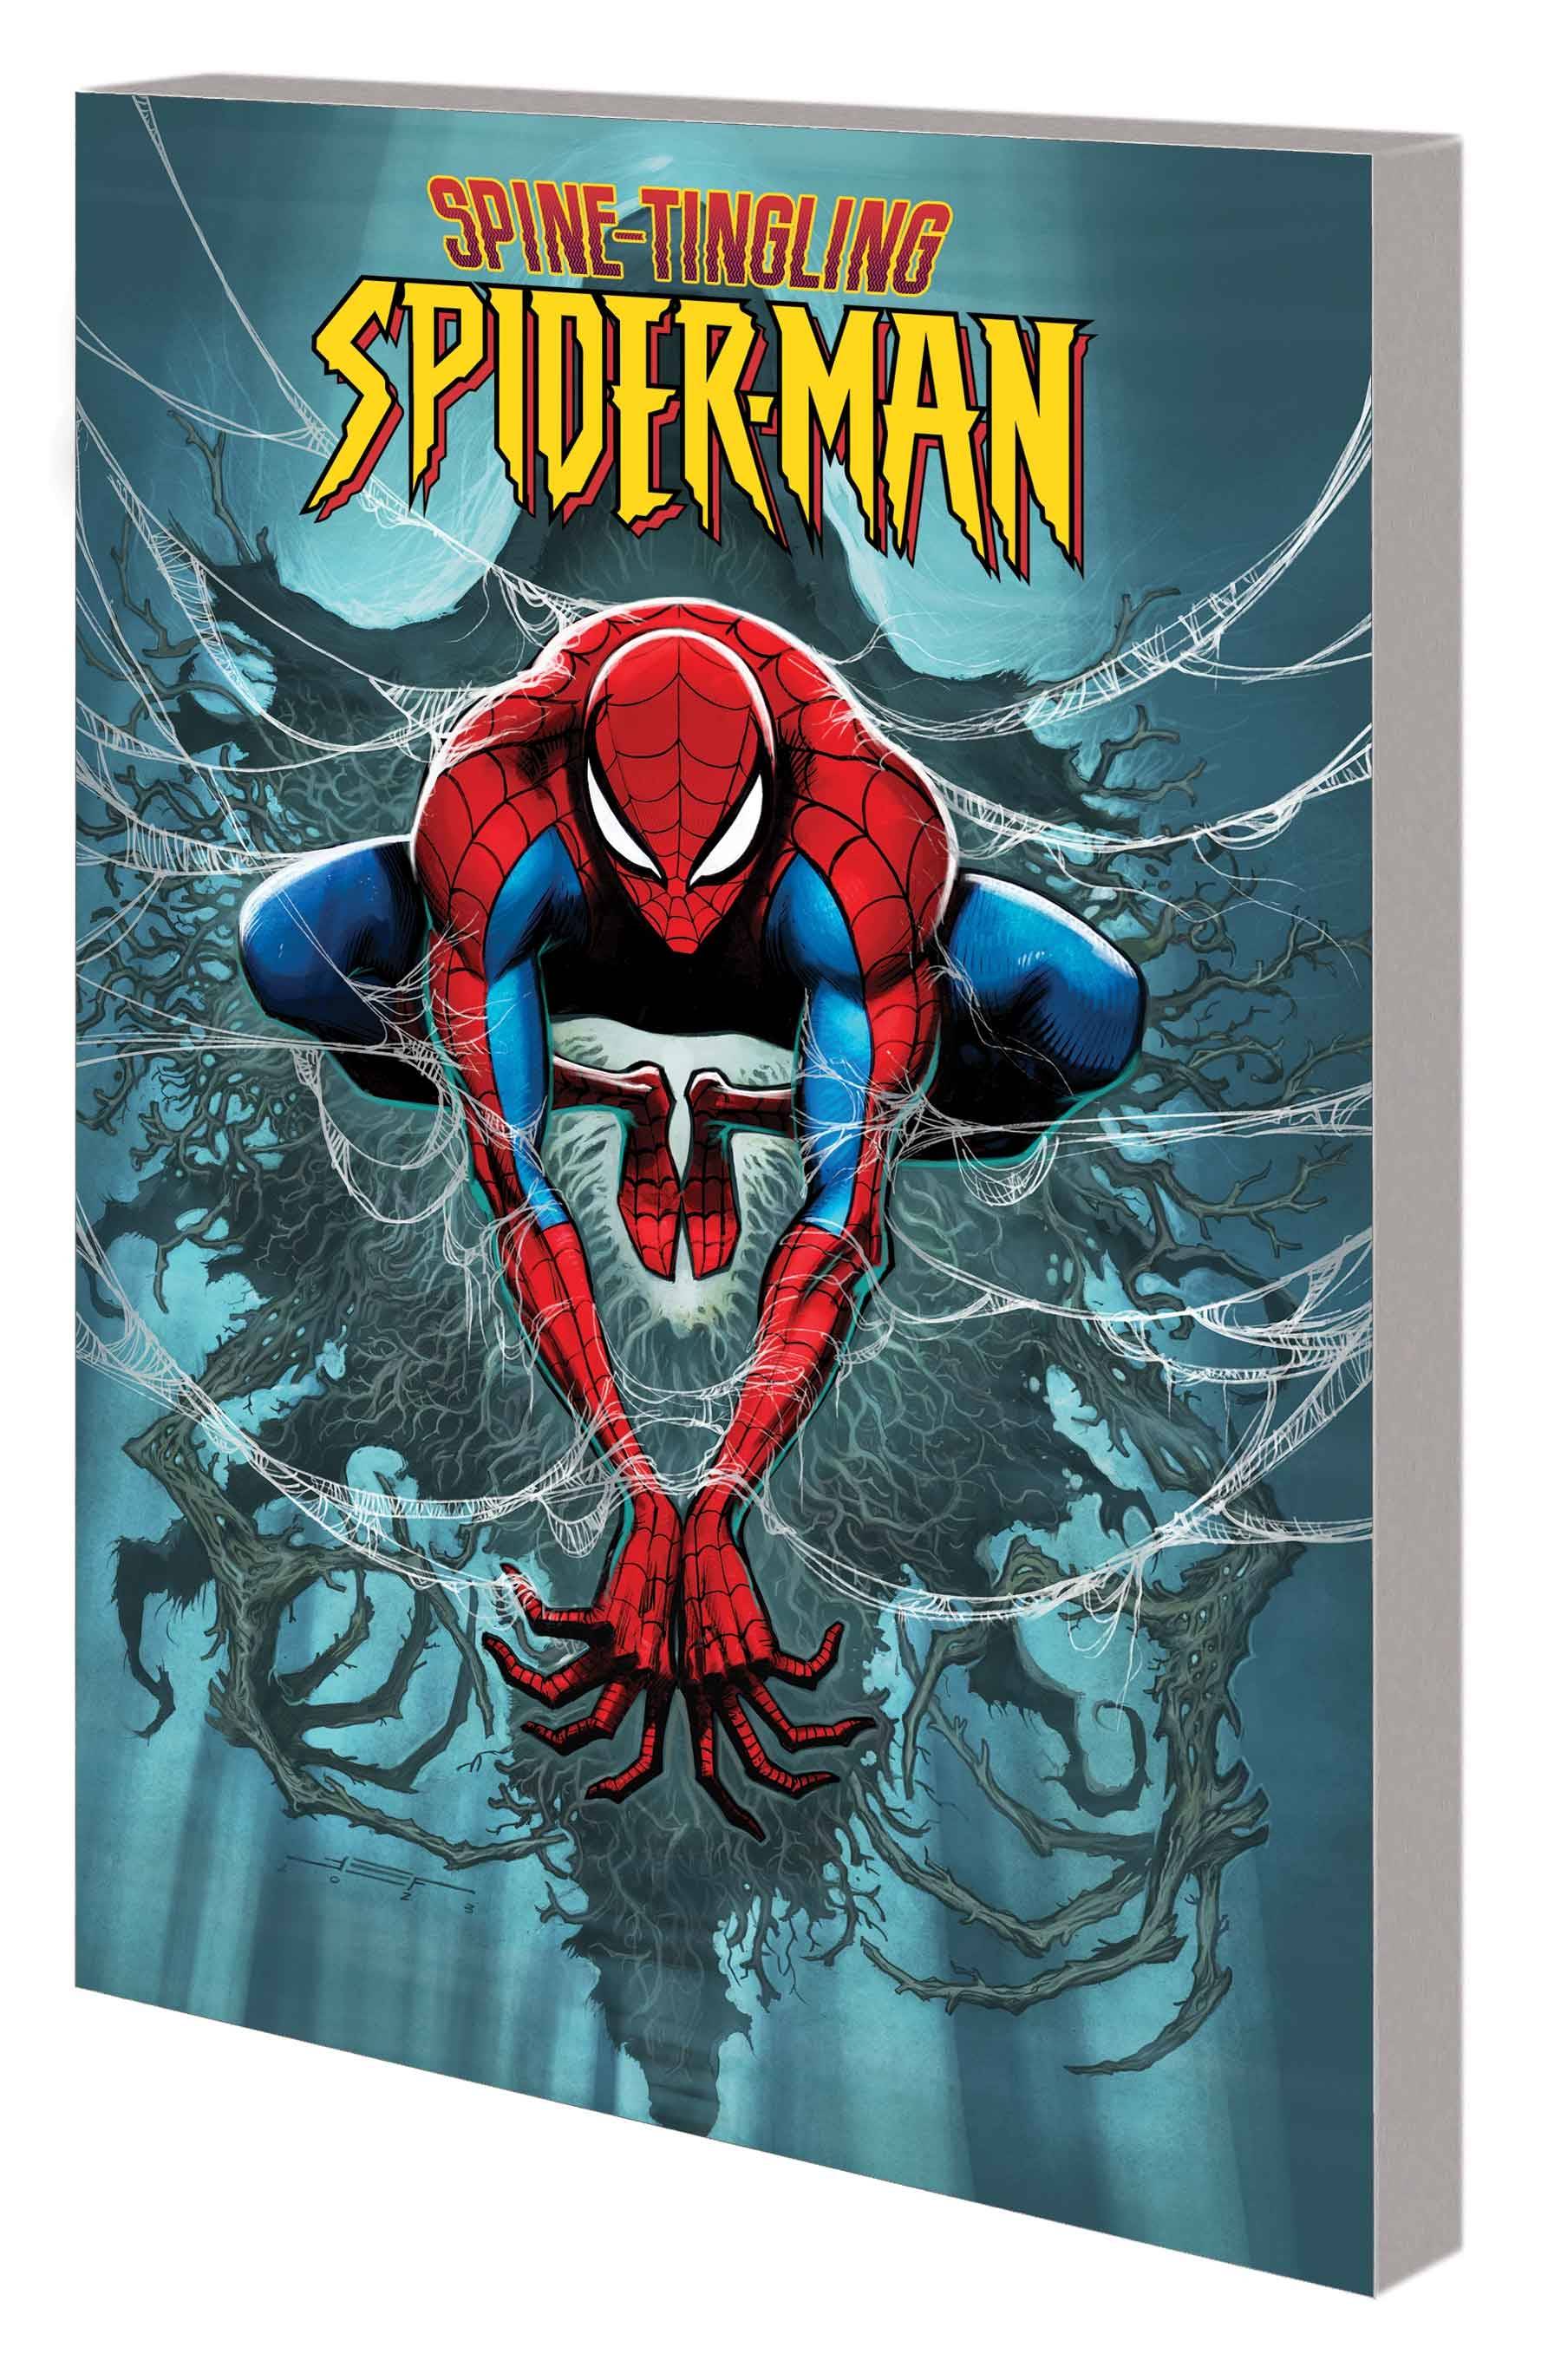 Spine-Tingling Spider-Man Tp - State of Comics